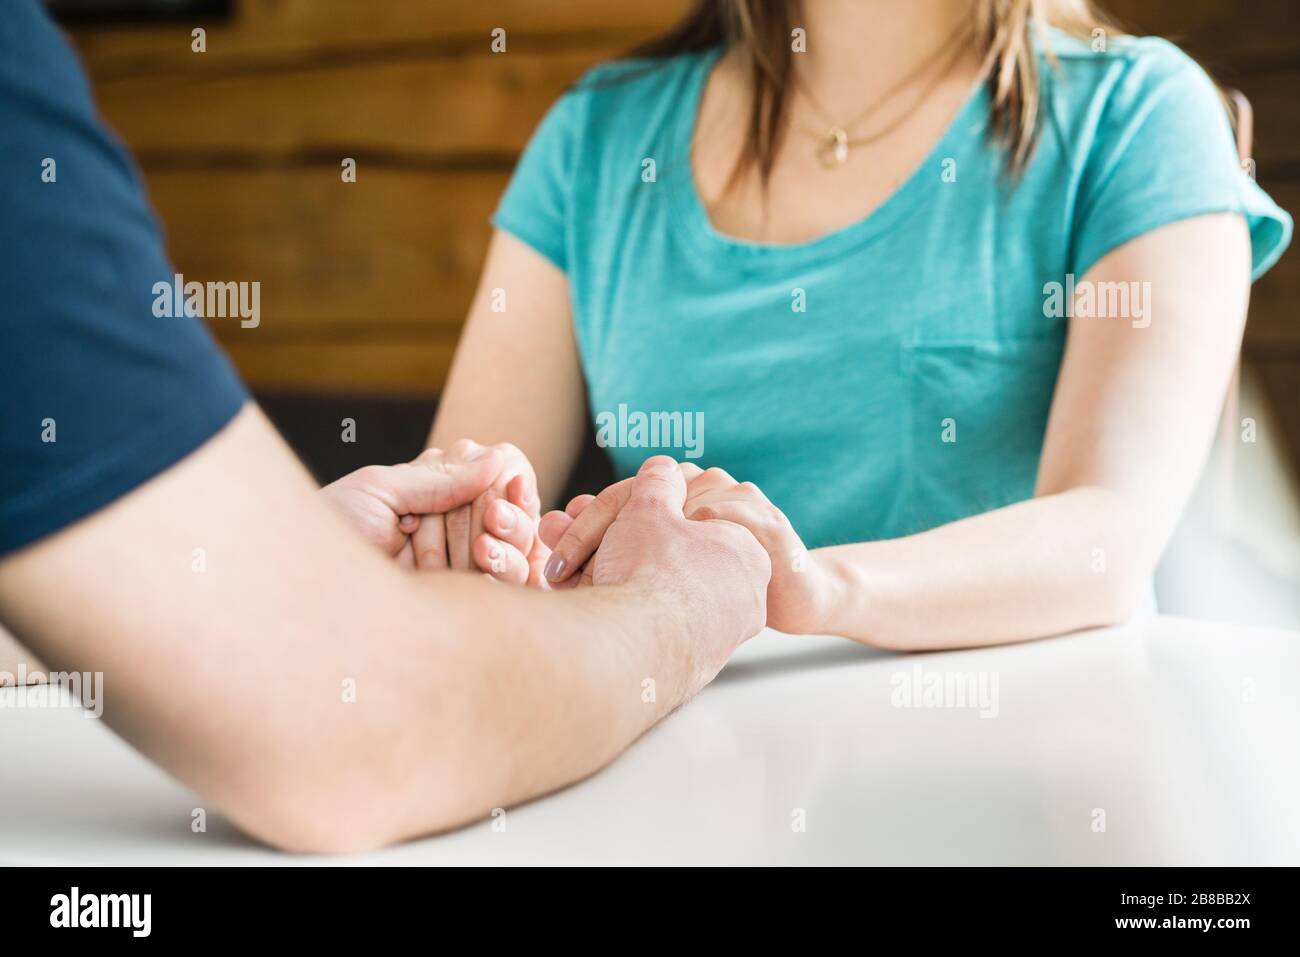 Couple holding hands on table together. Support, help, caring, forgiveness or apology. Man comforting sad woman. Compassion and empathy. Stock Photo